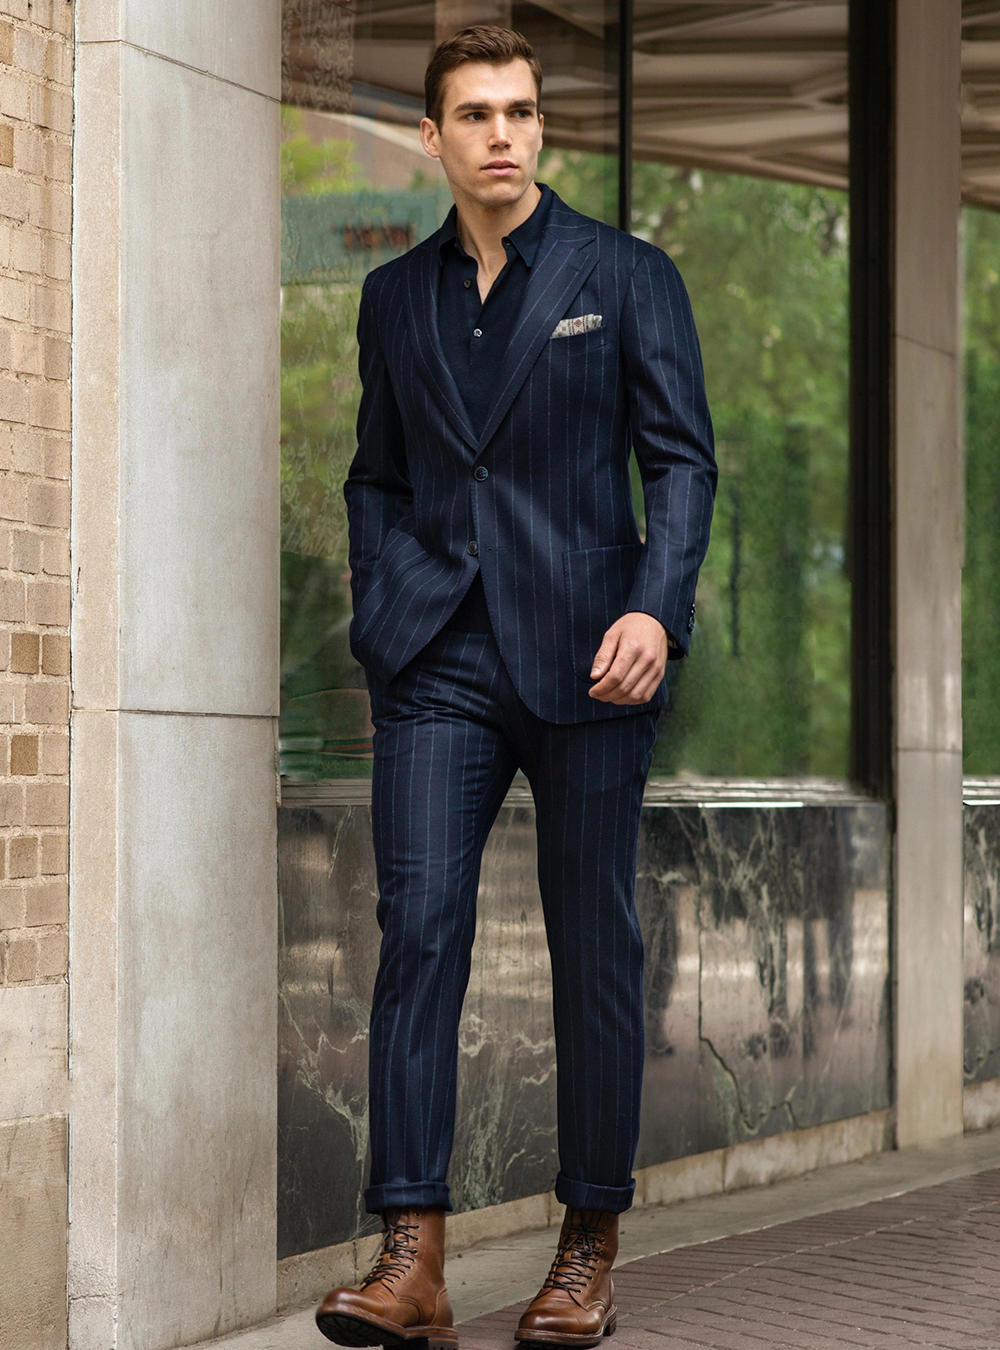 navy suit, navy polo t-shirt, and brown dress boots